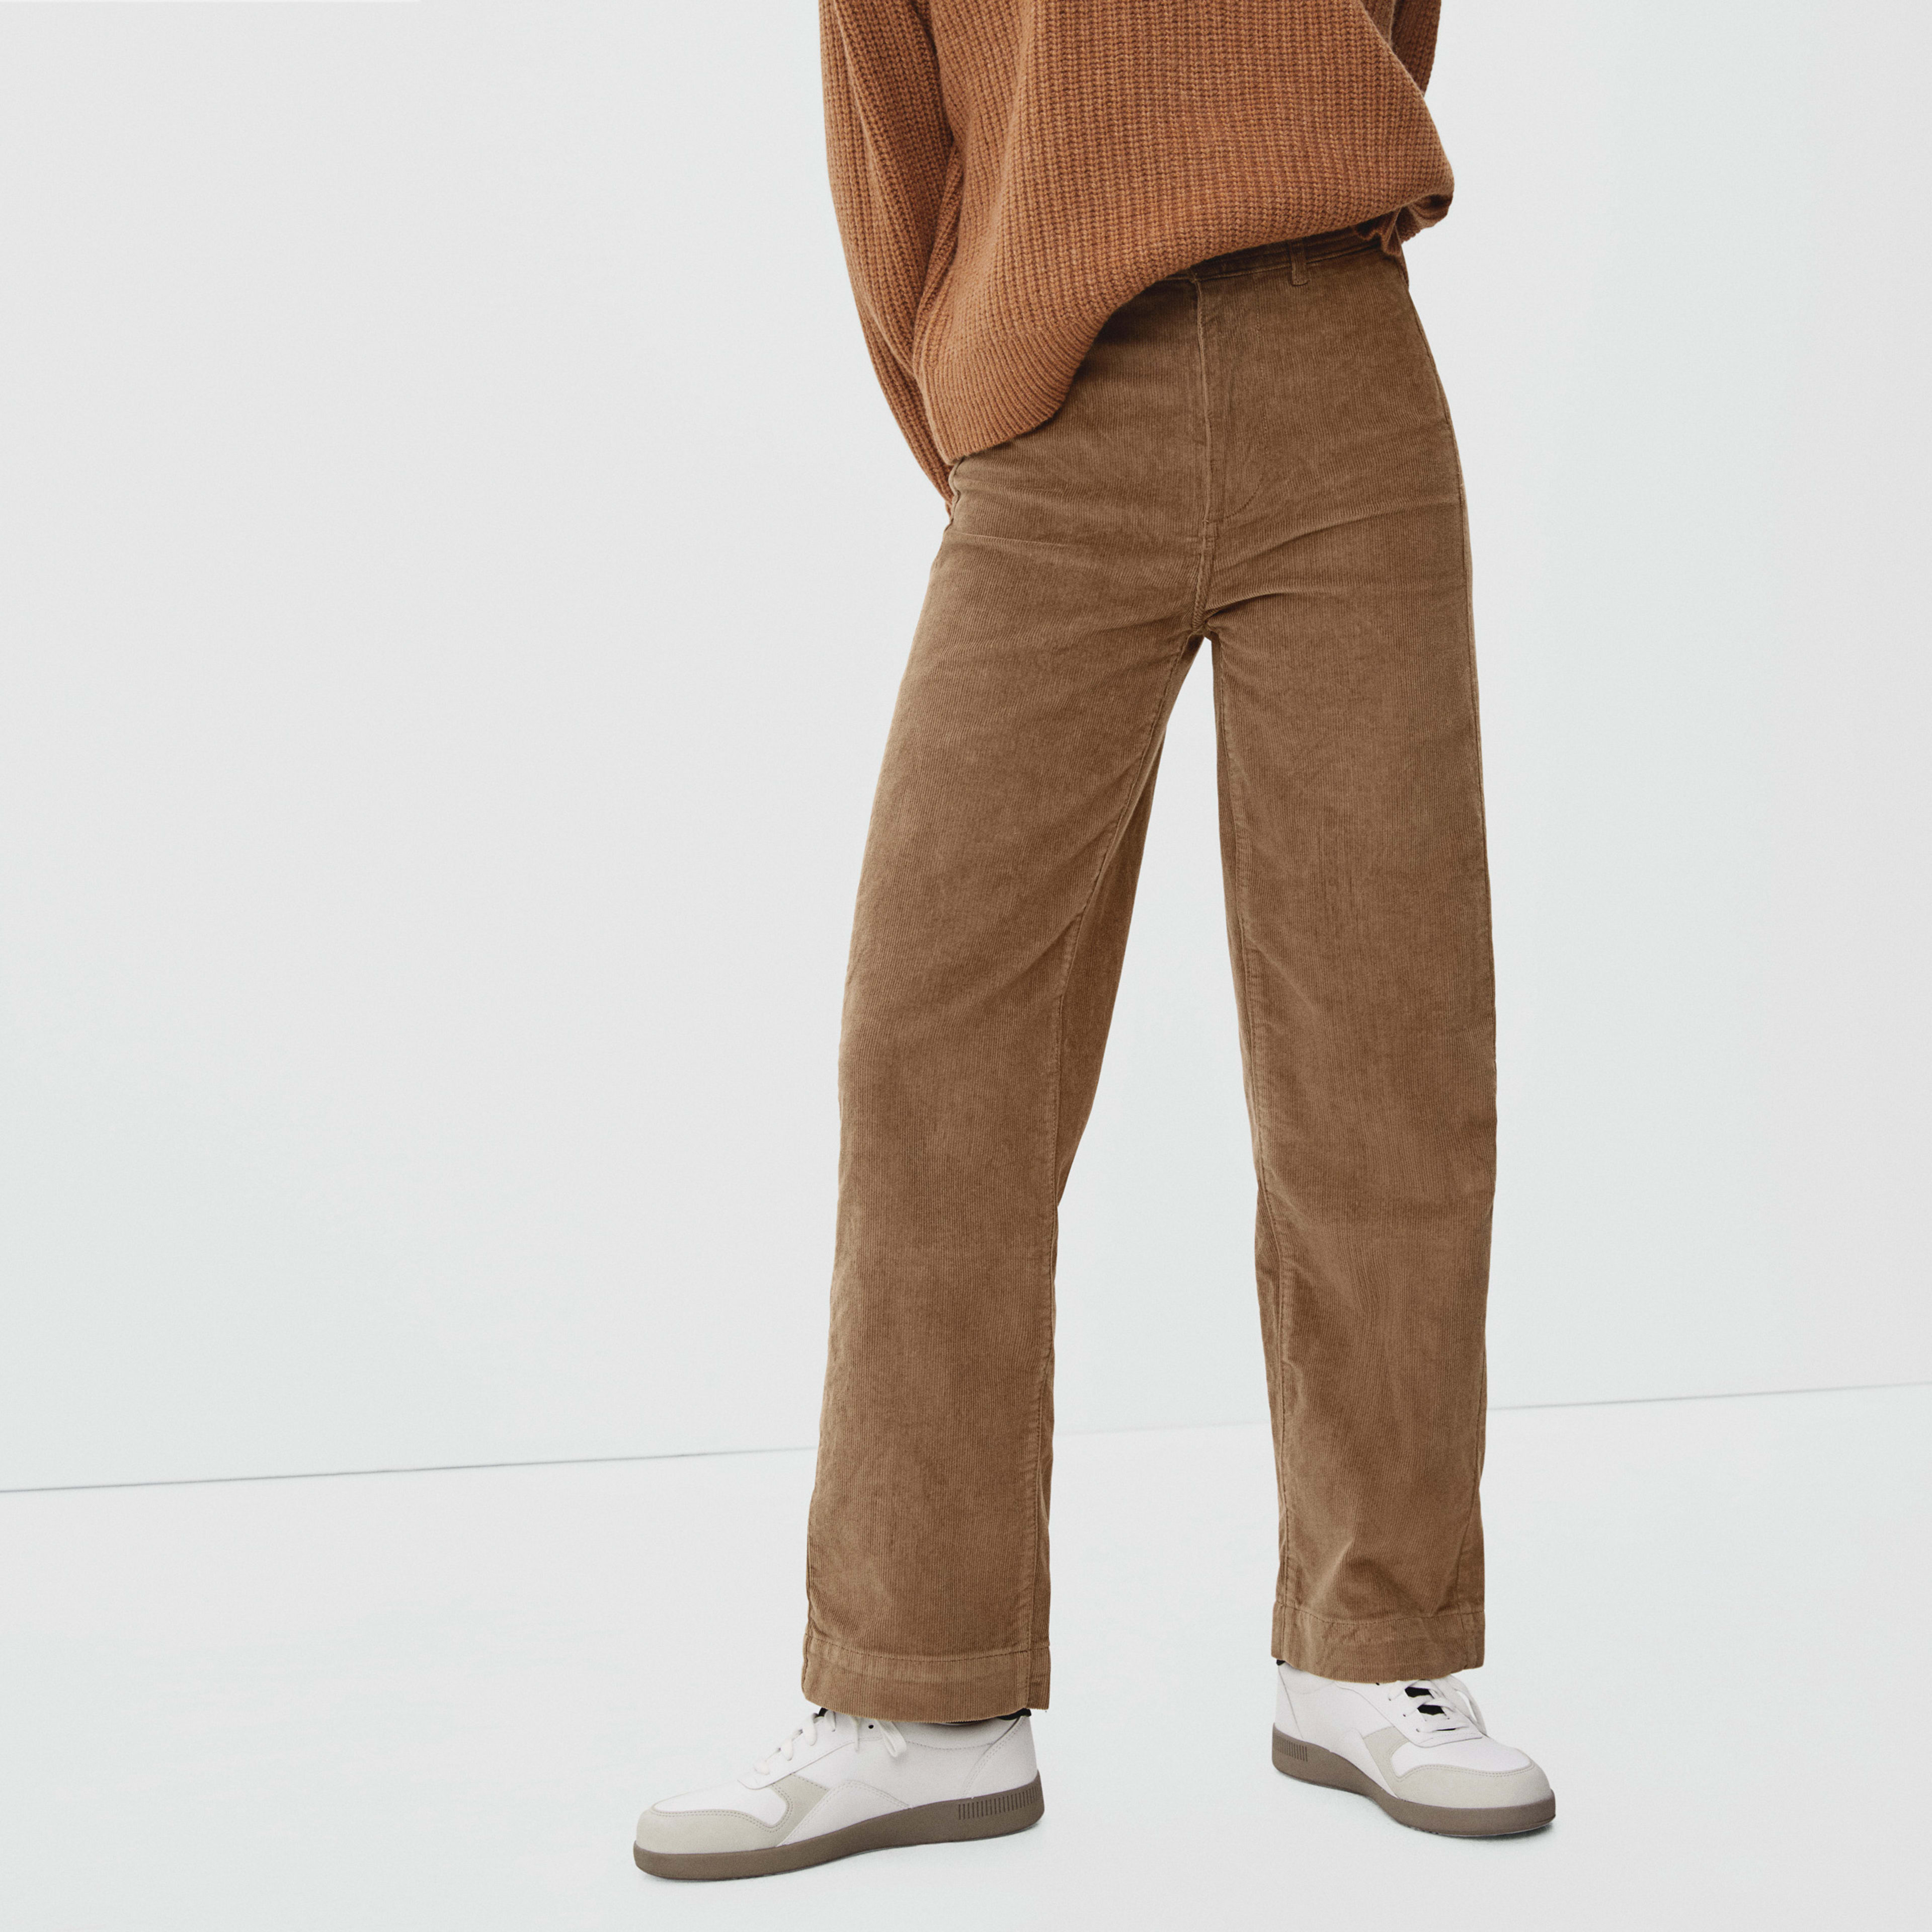 Women's Corduroy Wide-Leg Pant by Everlane in Light Brown, Size 10